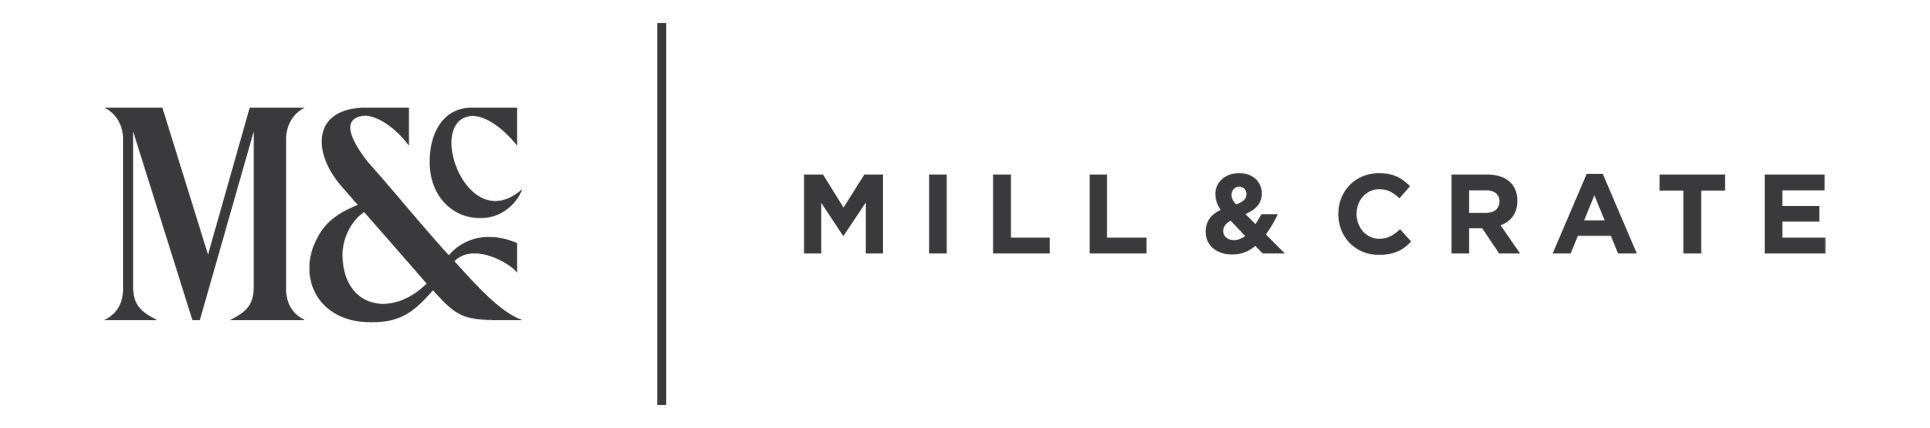 Mill & Crate logo